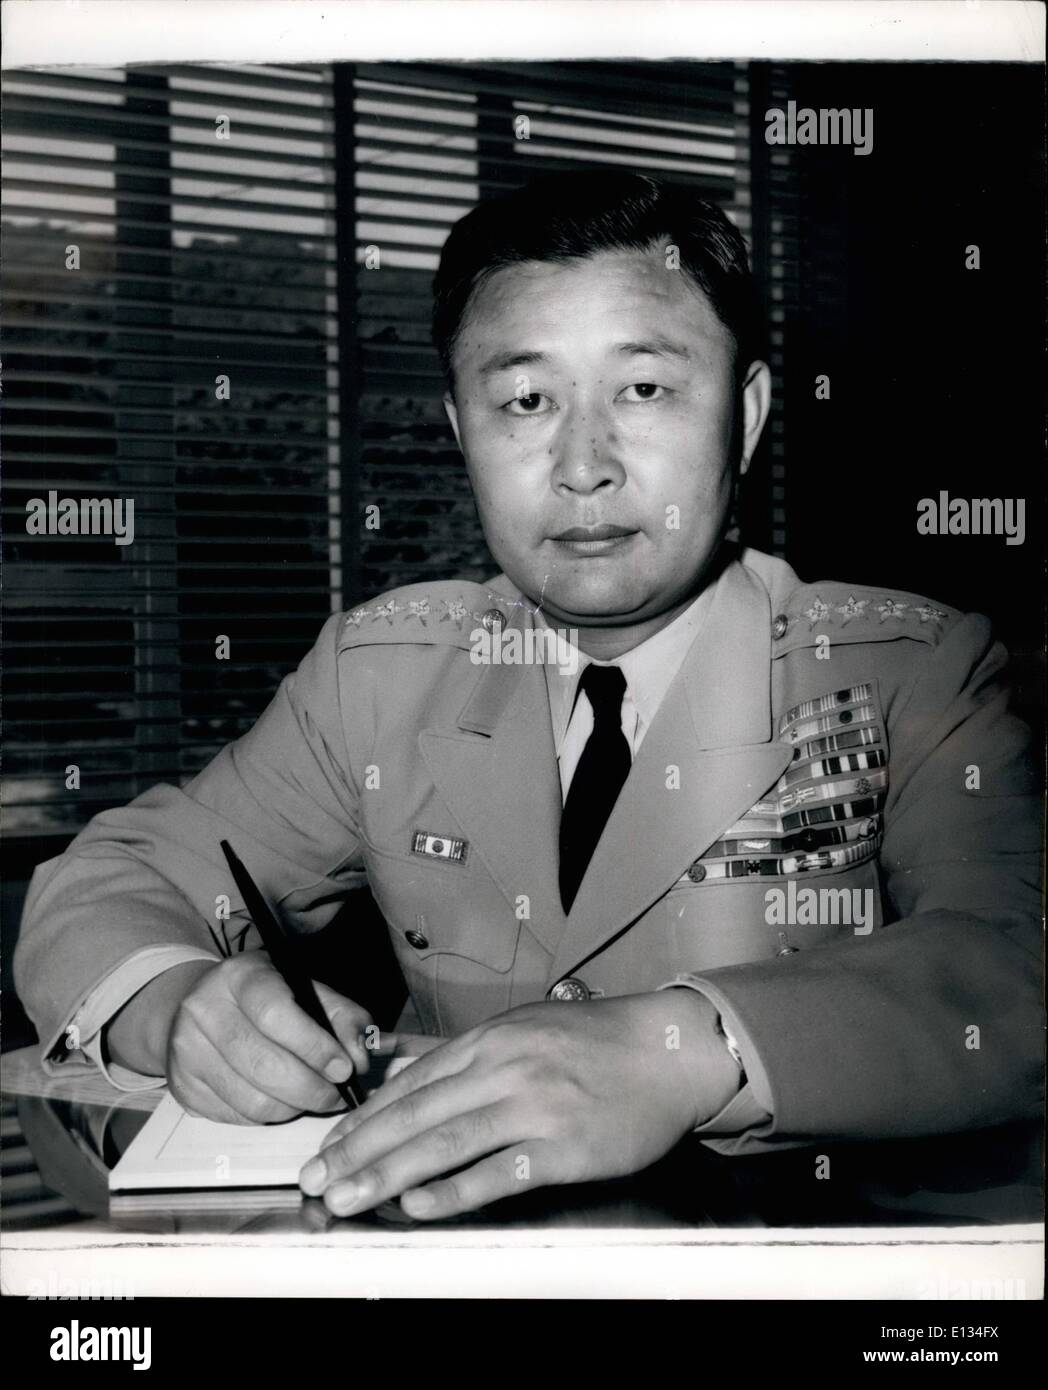 Feb. 28, 2012 - Founded Korean Counter-Intelligence: Chief of the Forces of the Republic of Korea, General Sun Yap Paik, was bron thirty-nine years ago in Pyonyang, present capital of Communist North Korea. He graduated from the Military Academy in Manchuria, later joining the Manchurian Army in 1942 while Korea was under Japanese rule. With the fall of Japan he joined the Korean Constabulary and in 1948 founded the first Korean Counter-Intelligence Corps. Later he led an Army division to recapture his home town from the communists. He has made several visits to the U.S Stock Photo